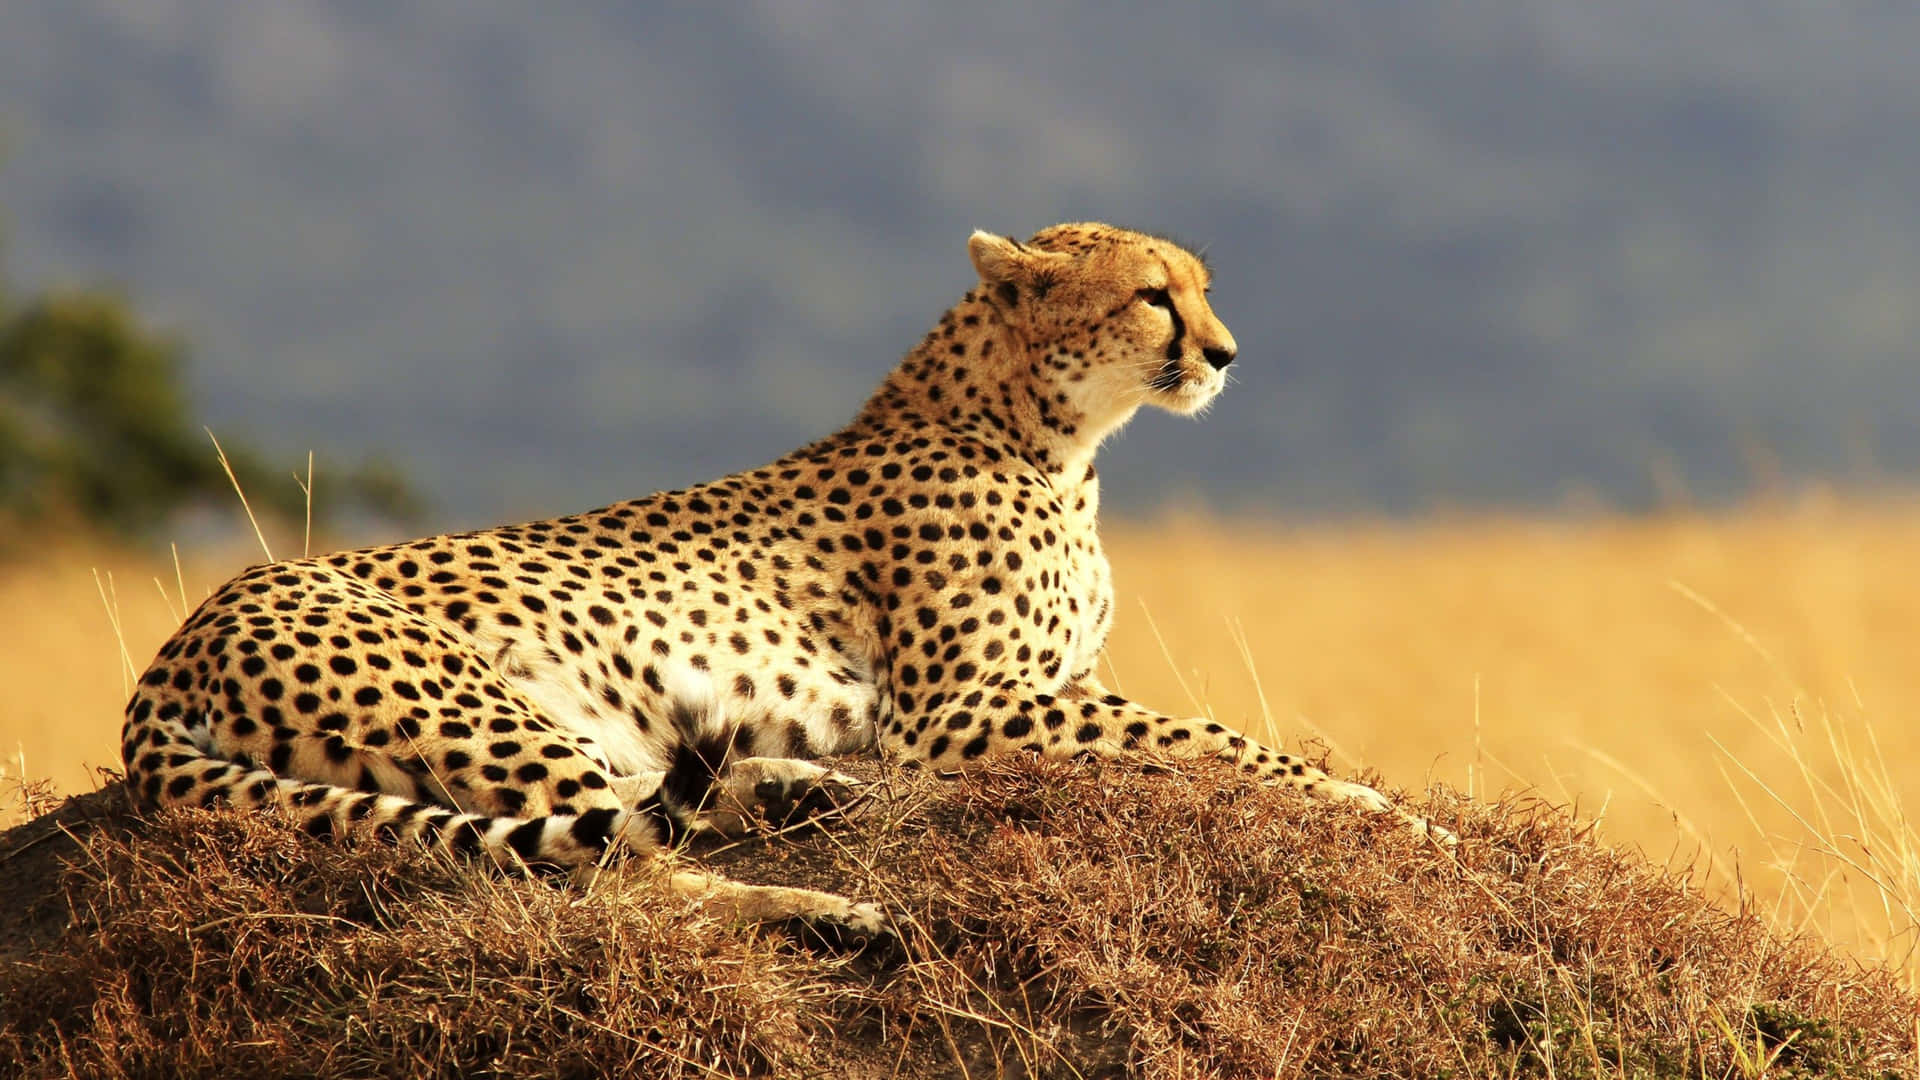 'The beautiful markings of the majestic cheetah in all its glory.' Wallpaper